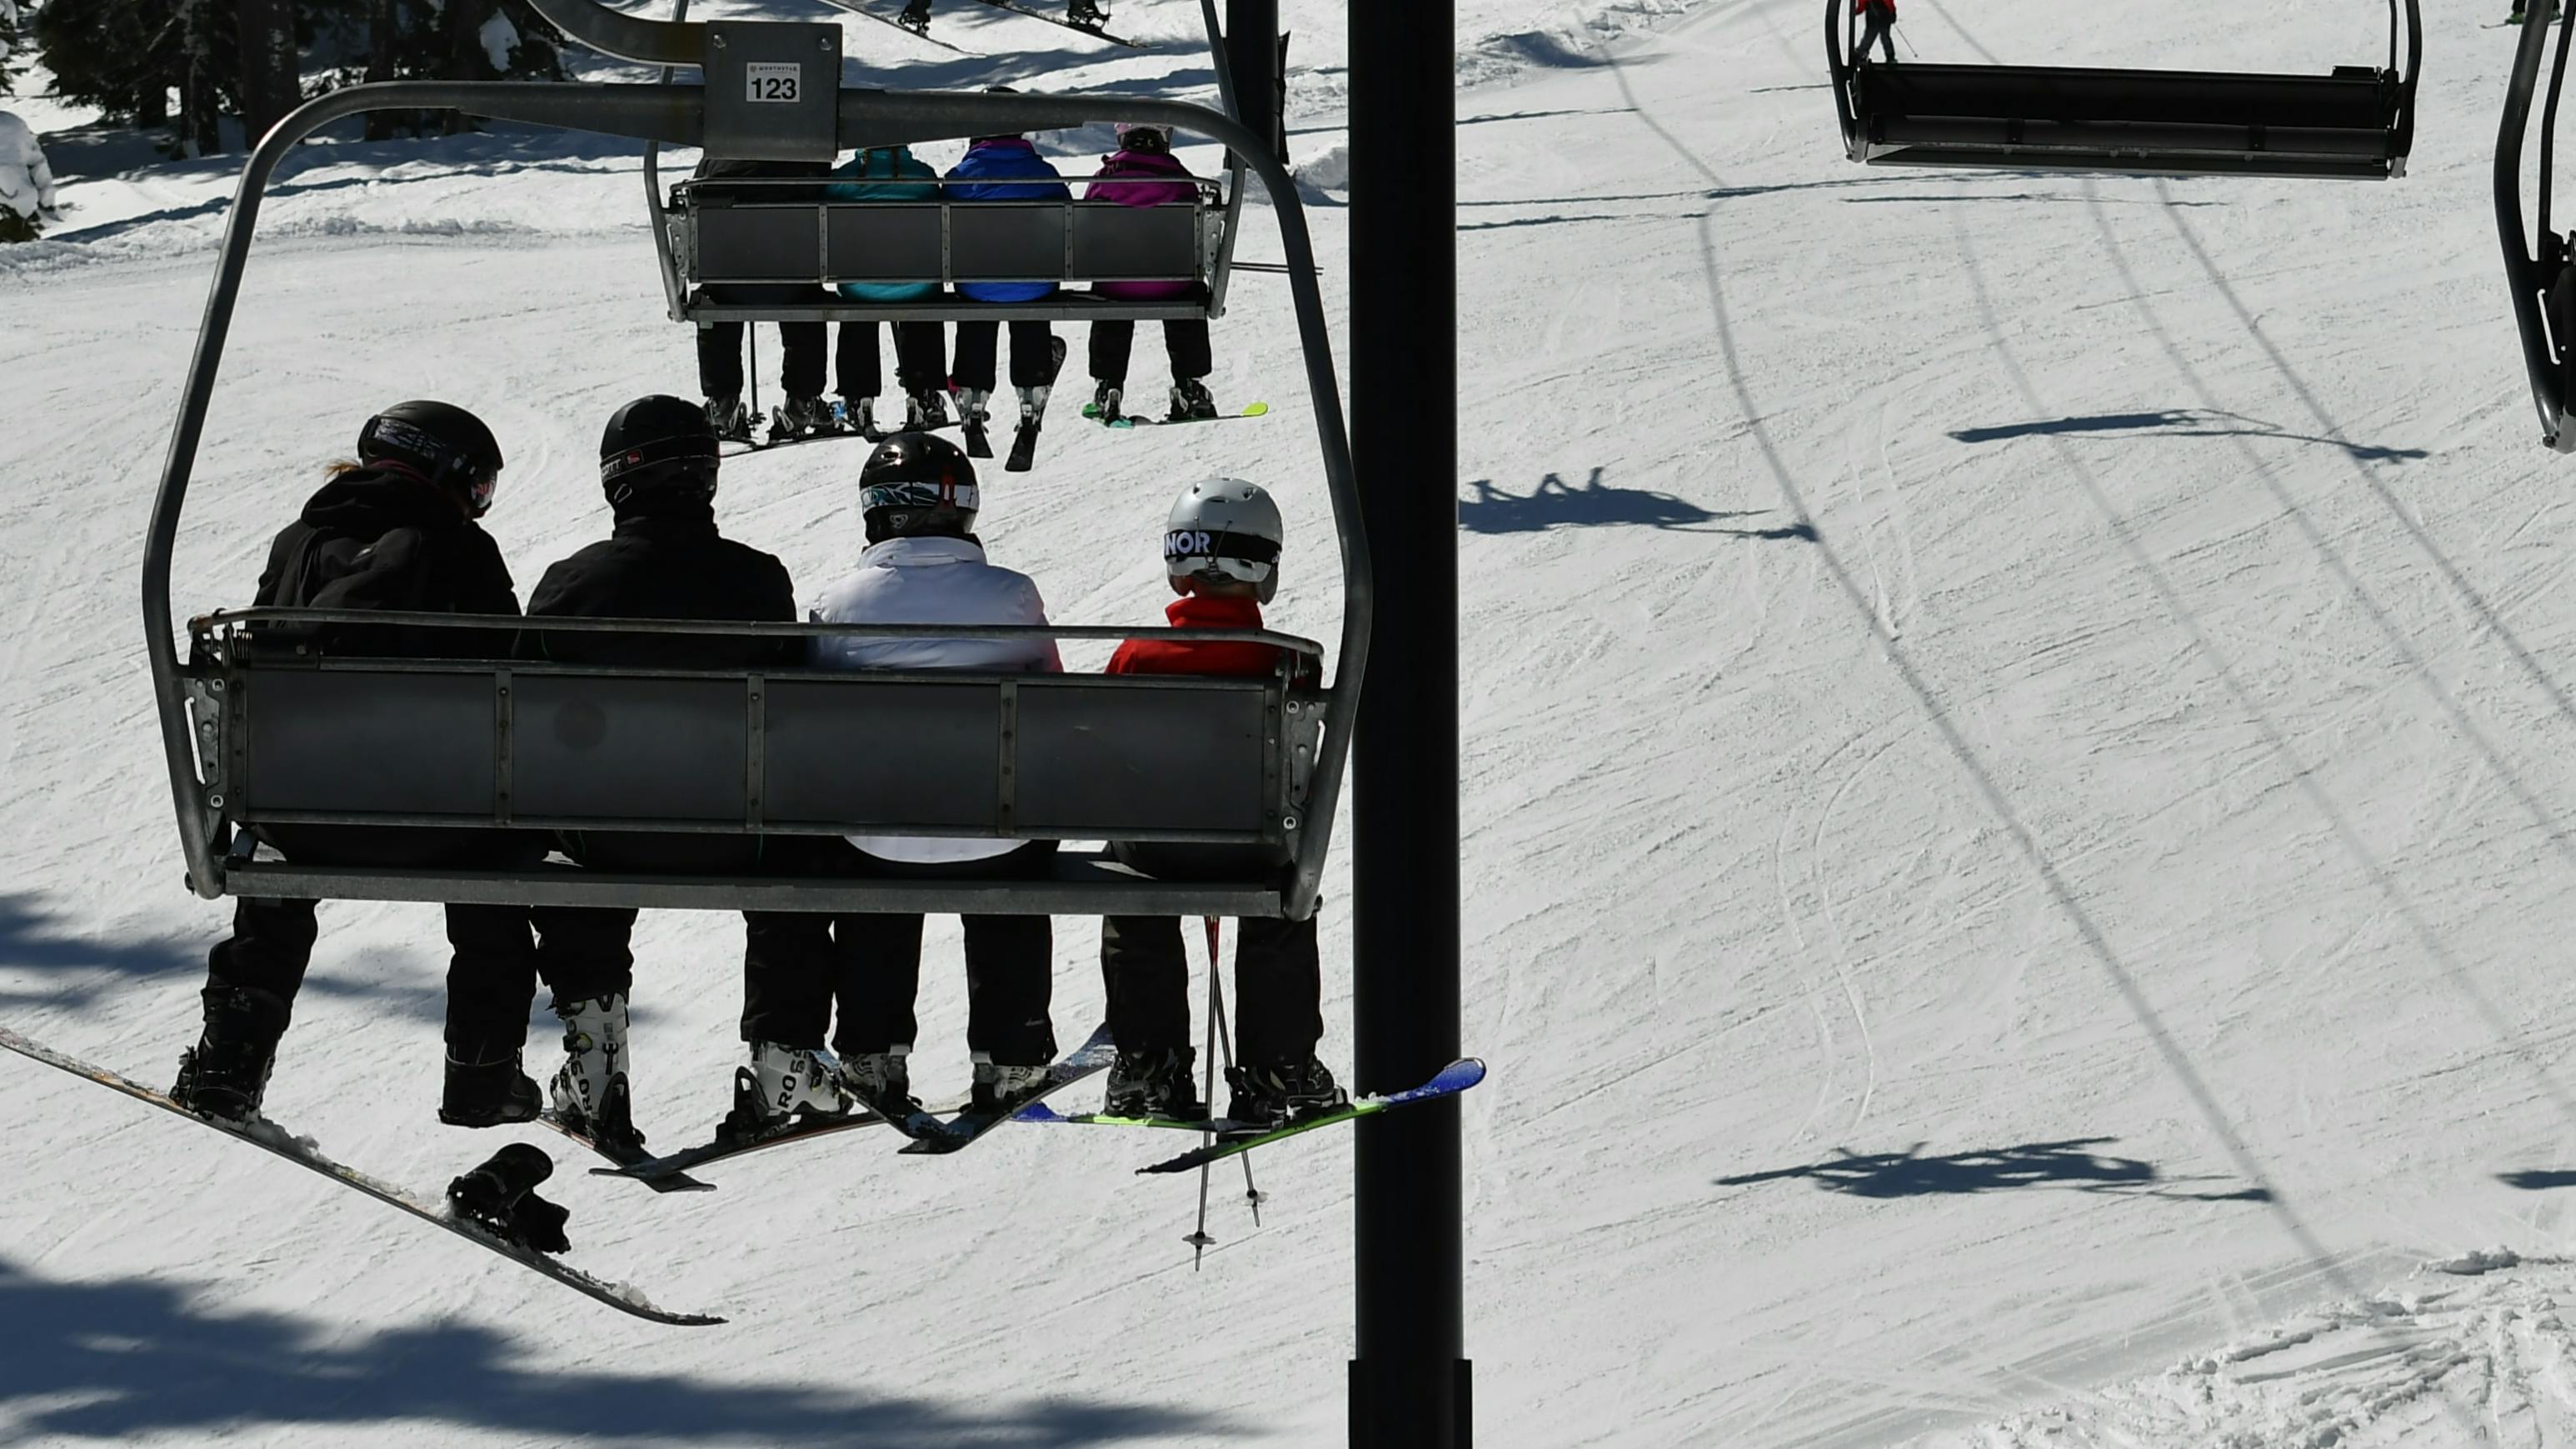 A family of 4 sits on a chairlift above a snowy slope. There is another 4-person group in front of them.